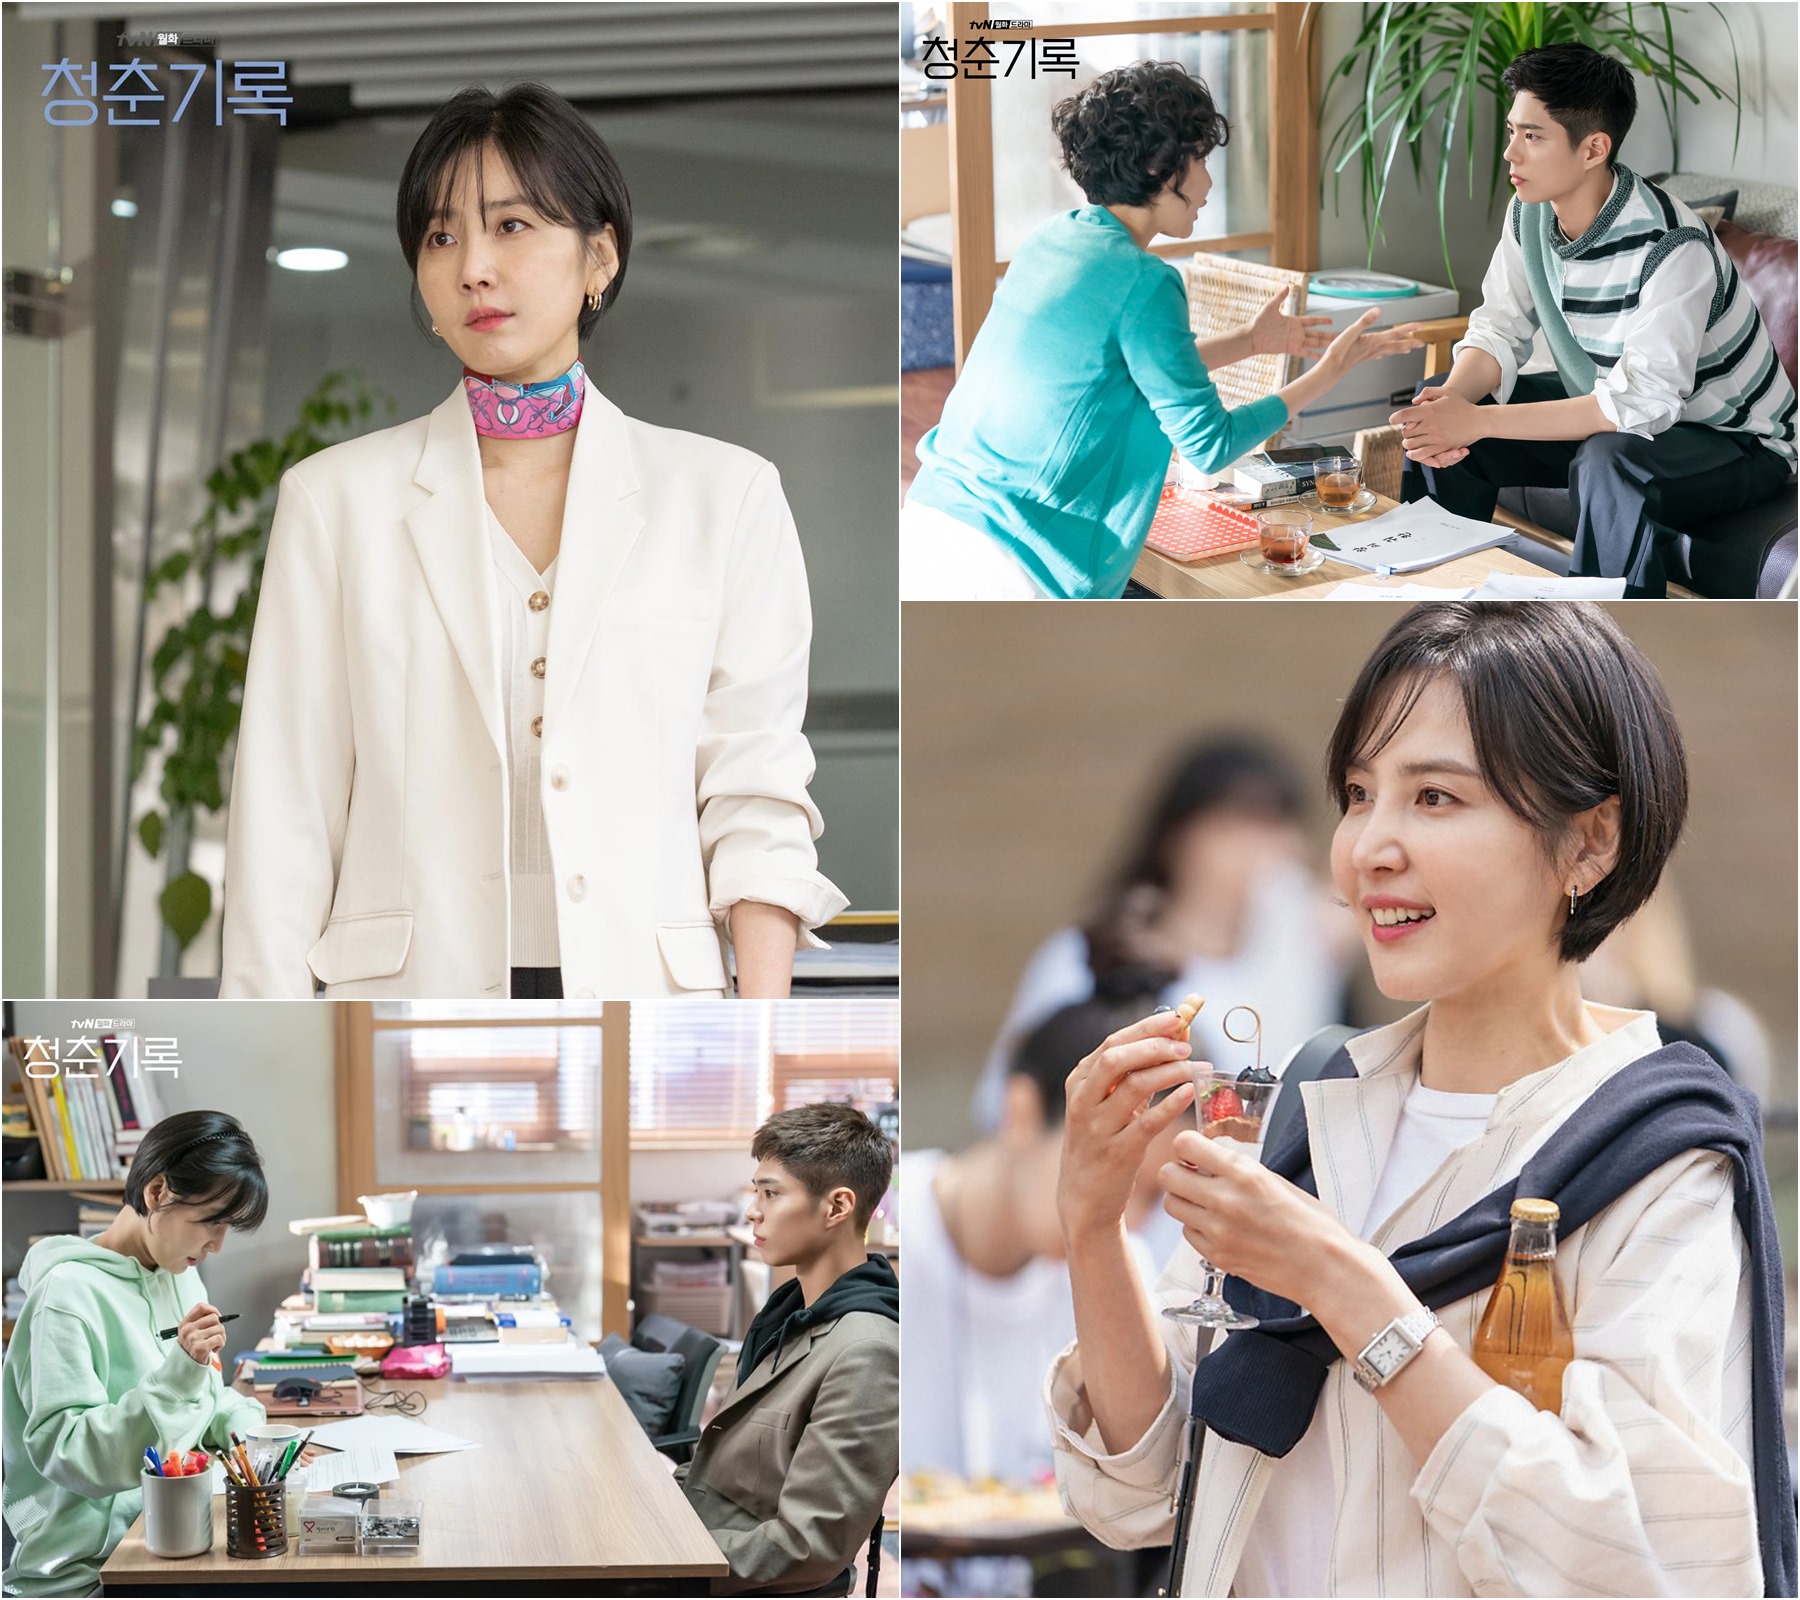 Shin Dong-mi and Park Bo-gum, who are Stradivarius toward dreams, are showing the essence of co-work.In TVNs monthly drama Record of Youth, the hot manager MinJae (Shin Dong-mi) and the realistic actor Sa Hye-joon (Park Bo-gum) are getting a hot response from viewers by bringing from the joy to the excitement of going straight to their dreams.As the production team said, The growth period of Shus Sa Hye-joon to survive in a fierce world is expected to be hotly drawn, Lee MinJaes role, which is supported by Hye-joon, is also expected.Record of Youth is a drama about the growth Record of Youth people who try to achieve their dreams and love without despairing on the wall of reality.Shin Dong-mi is a manager of Park Bo-gum and Stradivarius on his way to fulfill his dream.MinJae supports Hye-joon, who was subjected to the injustice of Tae-soo (Lee Chang-hoon), and supports his dream.Starting with the words Write up to one second and throw a towel to Hye-joon, who wanted to go to the army with everything down, the two people set up Champon Entertainment and face their dreams in front of them.The more desperate and top model is, the more sparkling the dream itself gives viewers a pleasant and exciting catharsis.I love this kind of thing that helps people to be good and to be good, MinJae, who has dreamed of his own choice for the first time in his life, suffers from growth as soon as he starts his manager.I was frustrated by the interruption of the water, and I was diving.In MinJaes question, Can I help you?, Hyejun was not afraid to reveal the people of Champon Entertainment, which is starting with the heavy words I believe that I work for myself rather than working for others as if I have been hardened by the reality that has been evaluated numerous times.The warm and pleasant charm added to the spicy and salty growth of Shin Dong-mi and Park Bo-gum is making viewers feel more sympathetic and laughable.As a helper of each other, as a fellow walking together, it is driving fun and popularity with a sense of touch.The relationship that supports and leads each other is revealed as a powerful presence of the two actors and a co-work that goes to and from the eyes like a rich chanpon, and is responsible for the rhythm of the drama with another viewing point.Youth in the drama Record of Youth seems to mean a dreamer.In the dream of senior model as the grandfather of Hye-joon, there is also a philosophy and dream ideal for Samingi (Han Jin-hee) who is Top Model and Han Ae-sook (Ha Hee-ra) who works as a helper at the house of his sons friend.This MinJae also has a new dream due to Sa Hye-joon, and such dreams are gathering to bring vitality to the drama.The reason why Shin Dong-mi is waiting for the appearance is because the dreams that want to be supported by someone are overflowing in reality with the existence of MinJae who supports Sa Hye-joon and goes straight to his dream.This is why I am looking forward to the story of Record of Youth in the future.Meanwhile, Record of Youth is broadcast every Monday and Tuesday at 9 pm.Photo = tvN, Shin Dong-mi Instagram